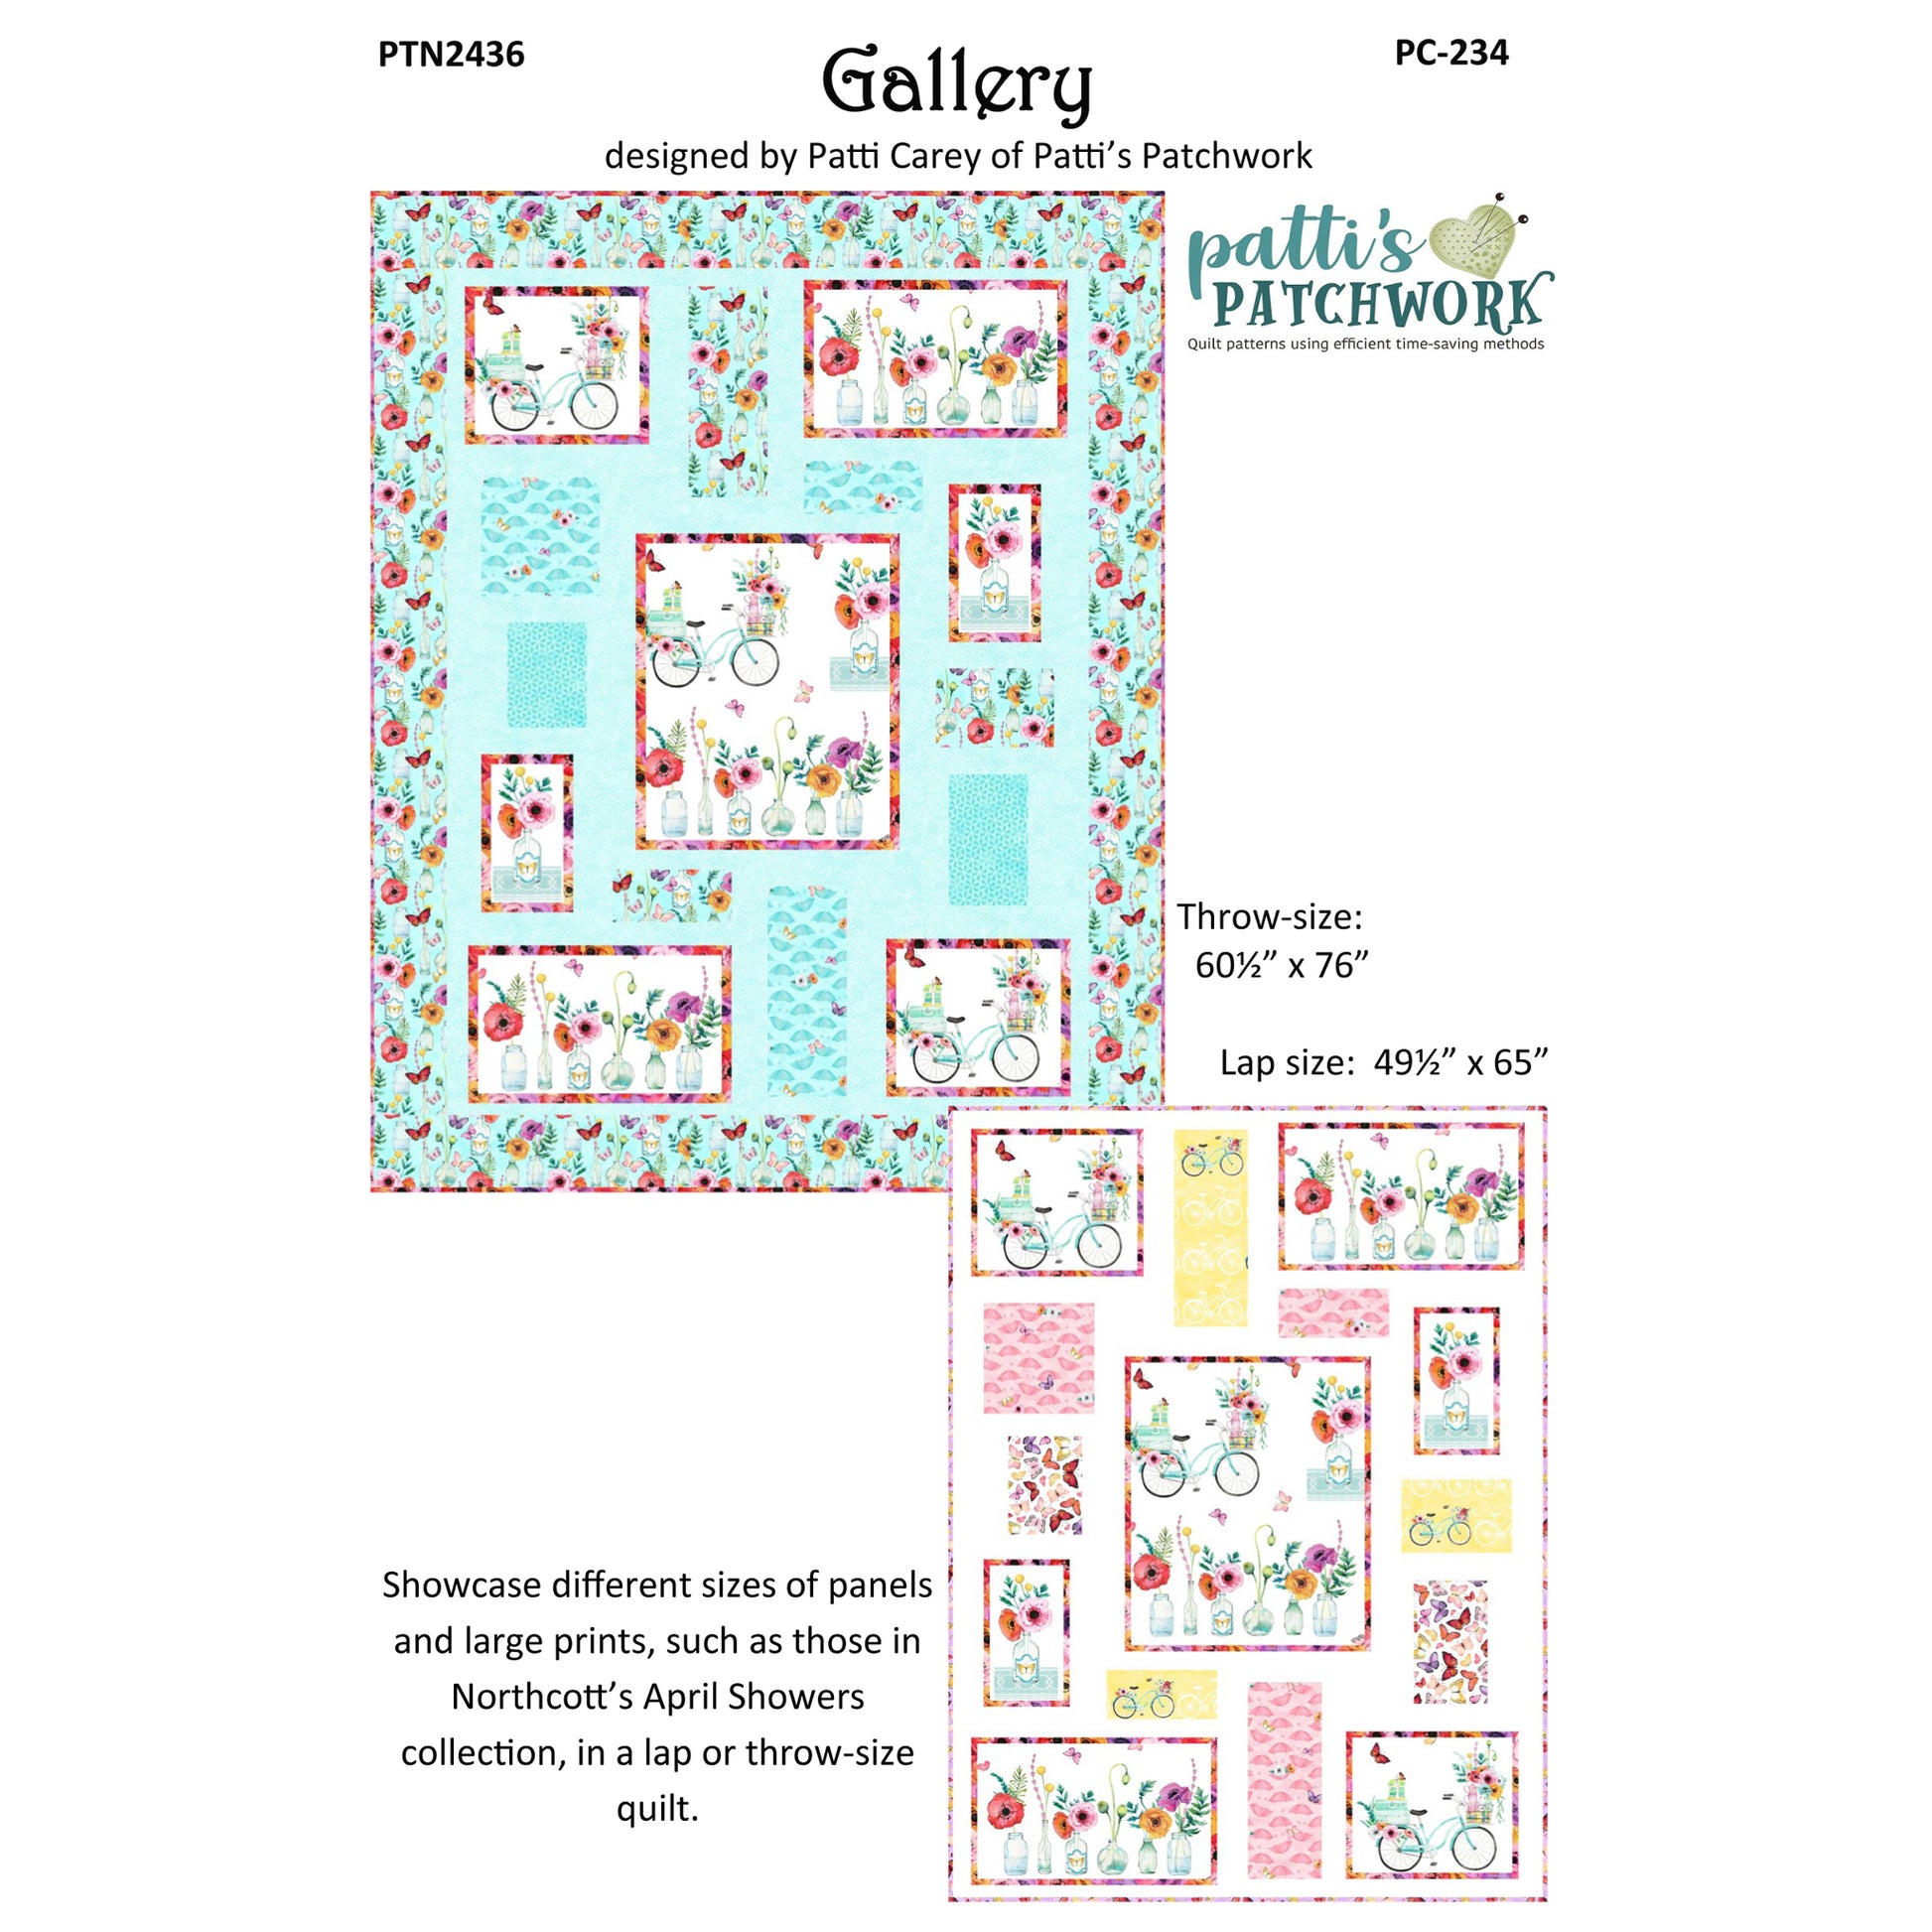 Cover image of pattern for Gallery Quilt.